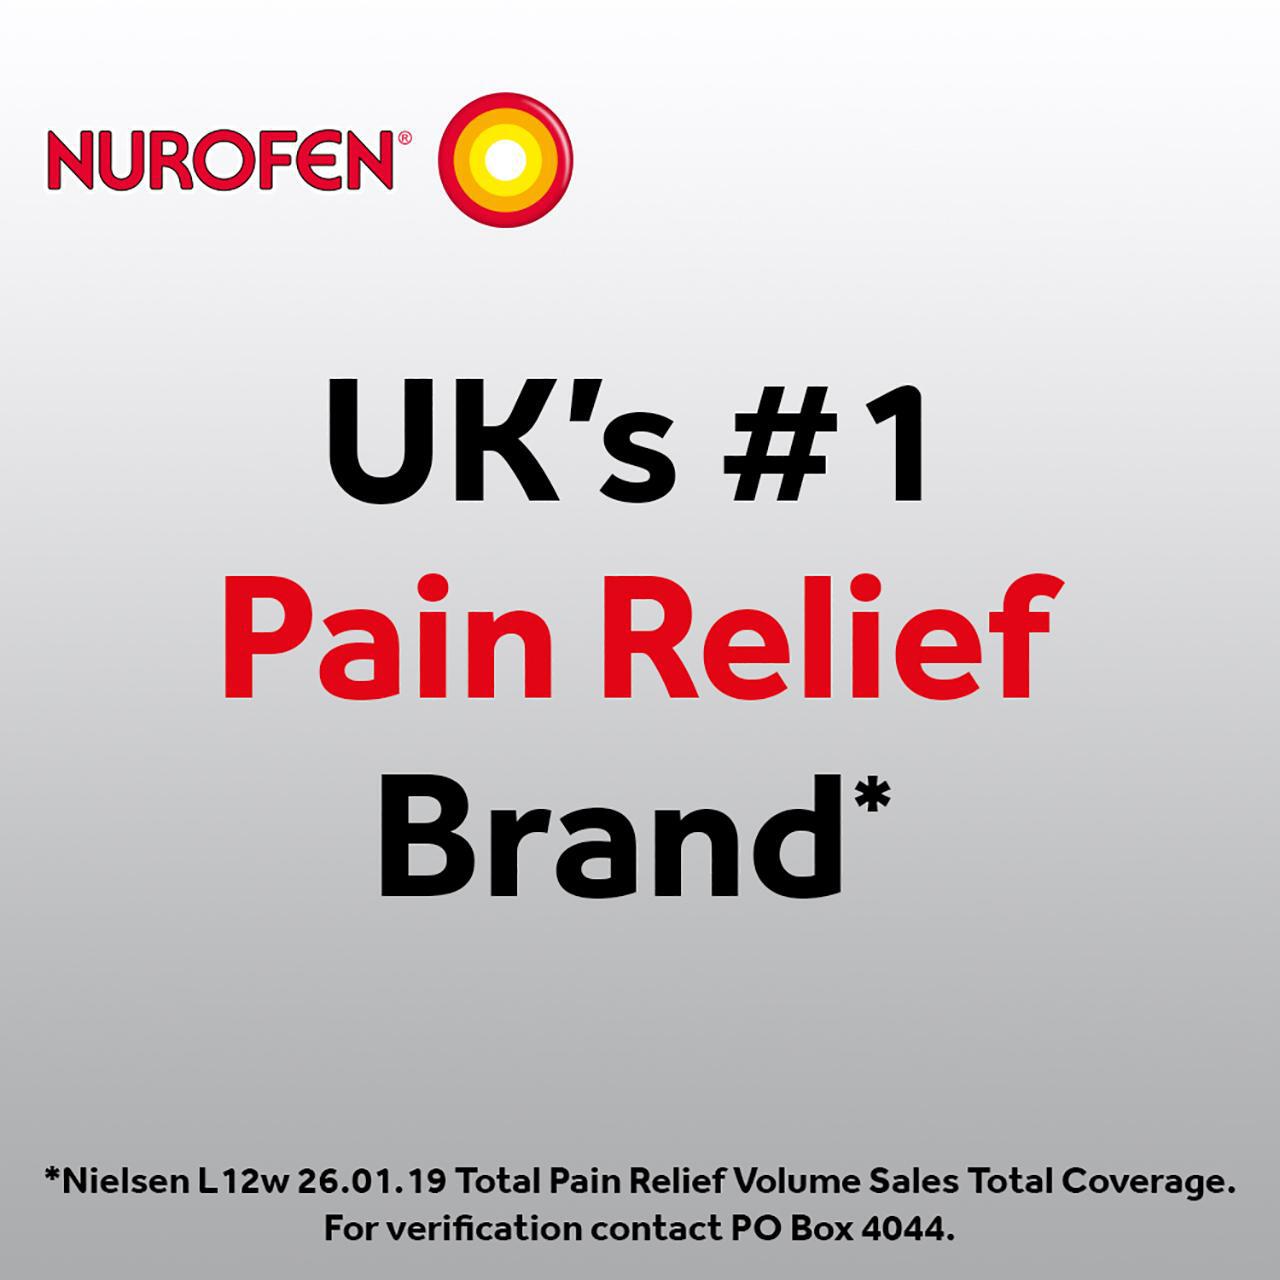 Nurofen Targeted Pain Relief Ibuprofen 200mg Tablets 16 per pack